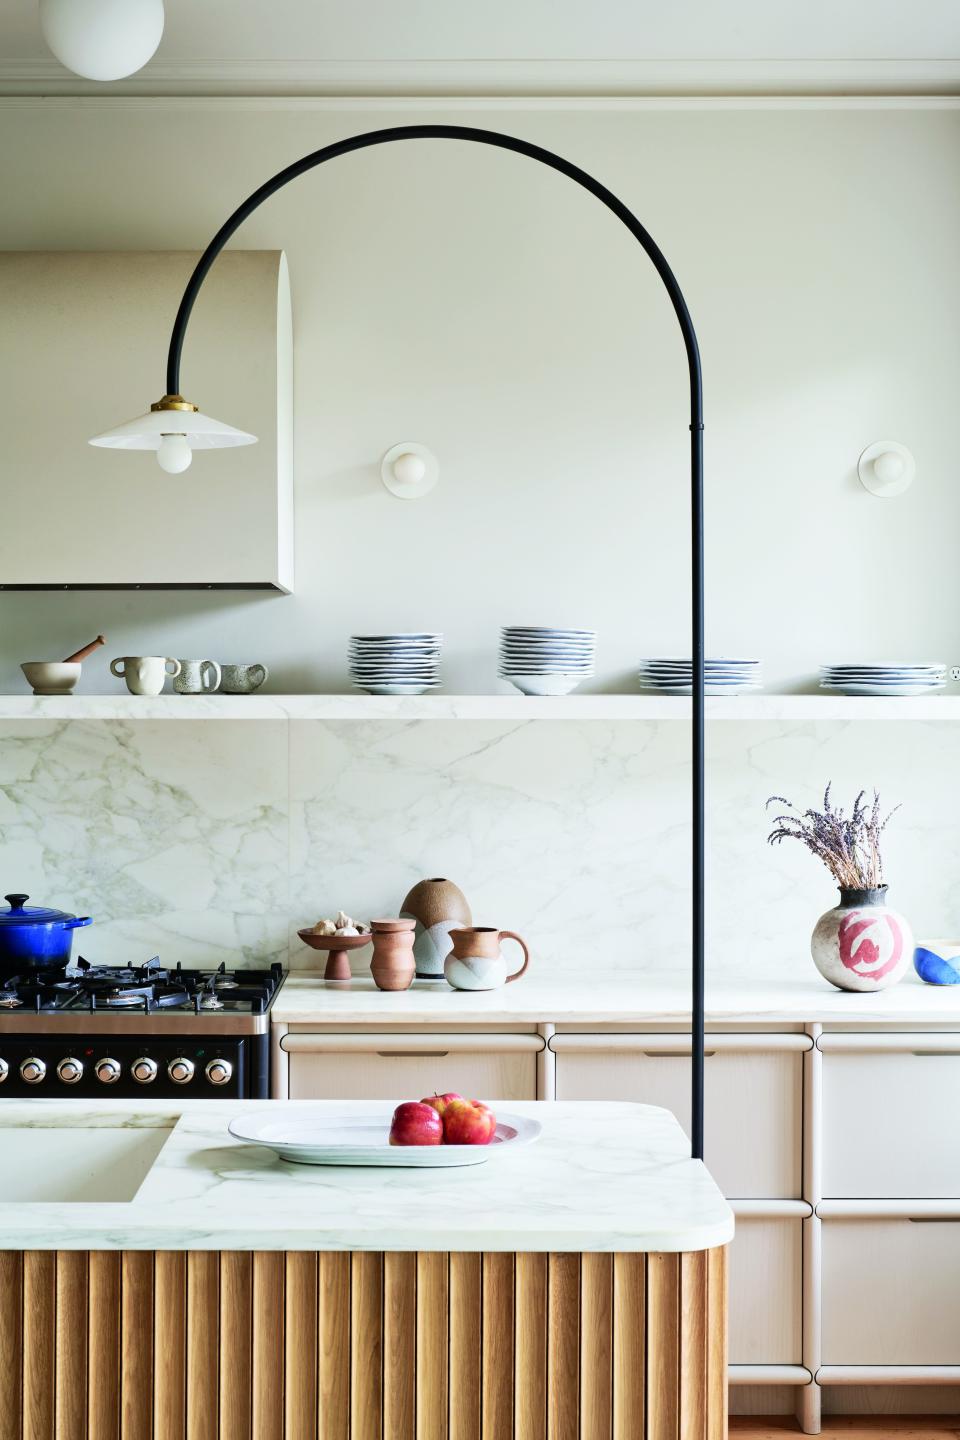 A kitchen designed by Brooklyn, New York’s Shapeless Studio that showcases a carefully curated assortment of ceramics.